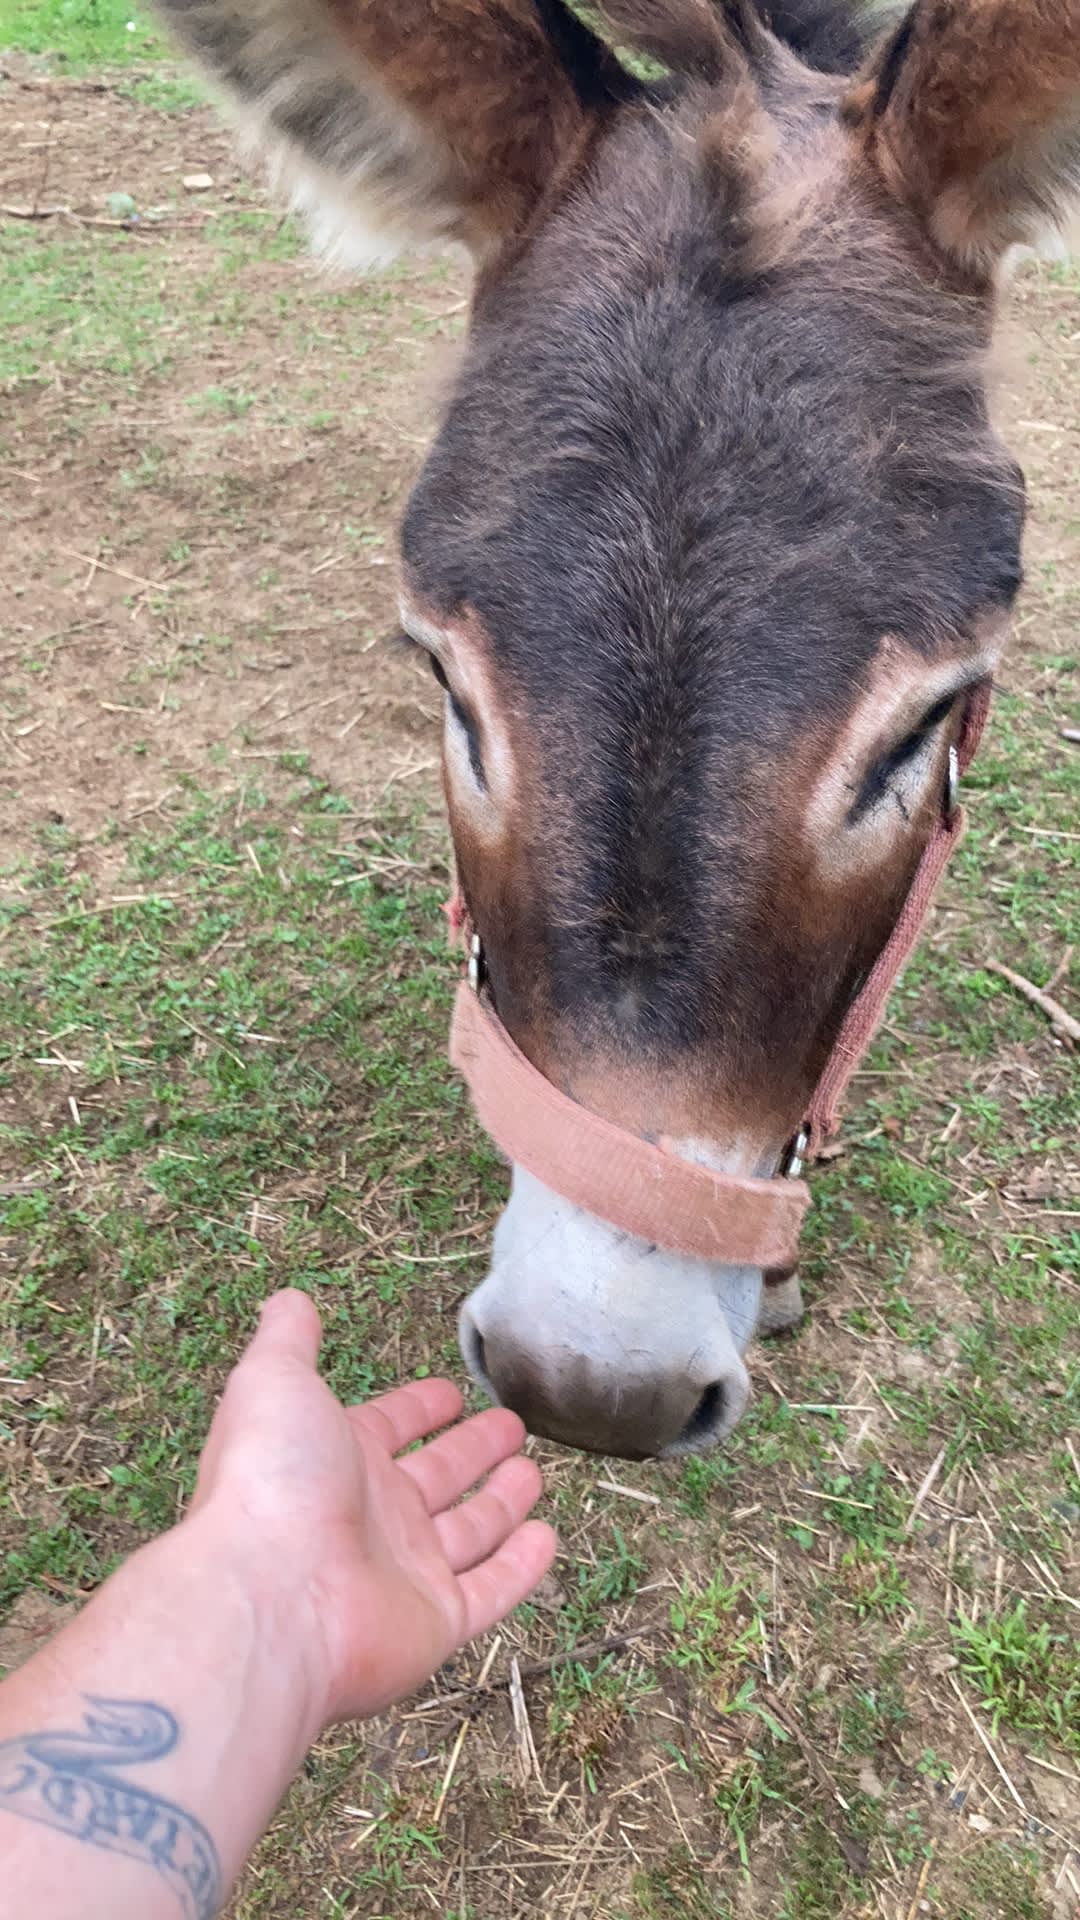 Our local celebrity and very good boy, Ser Arthur our donkey. Super kid friendly, likes to go on group walks and kid safe